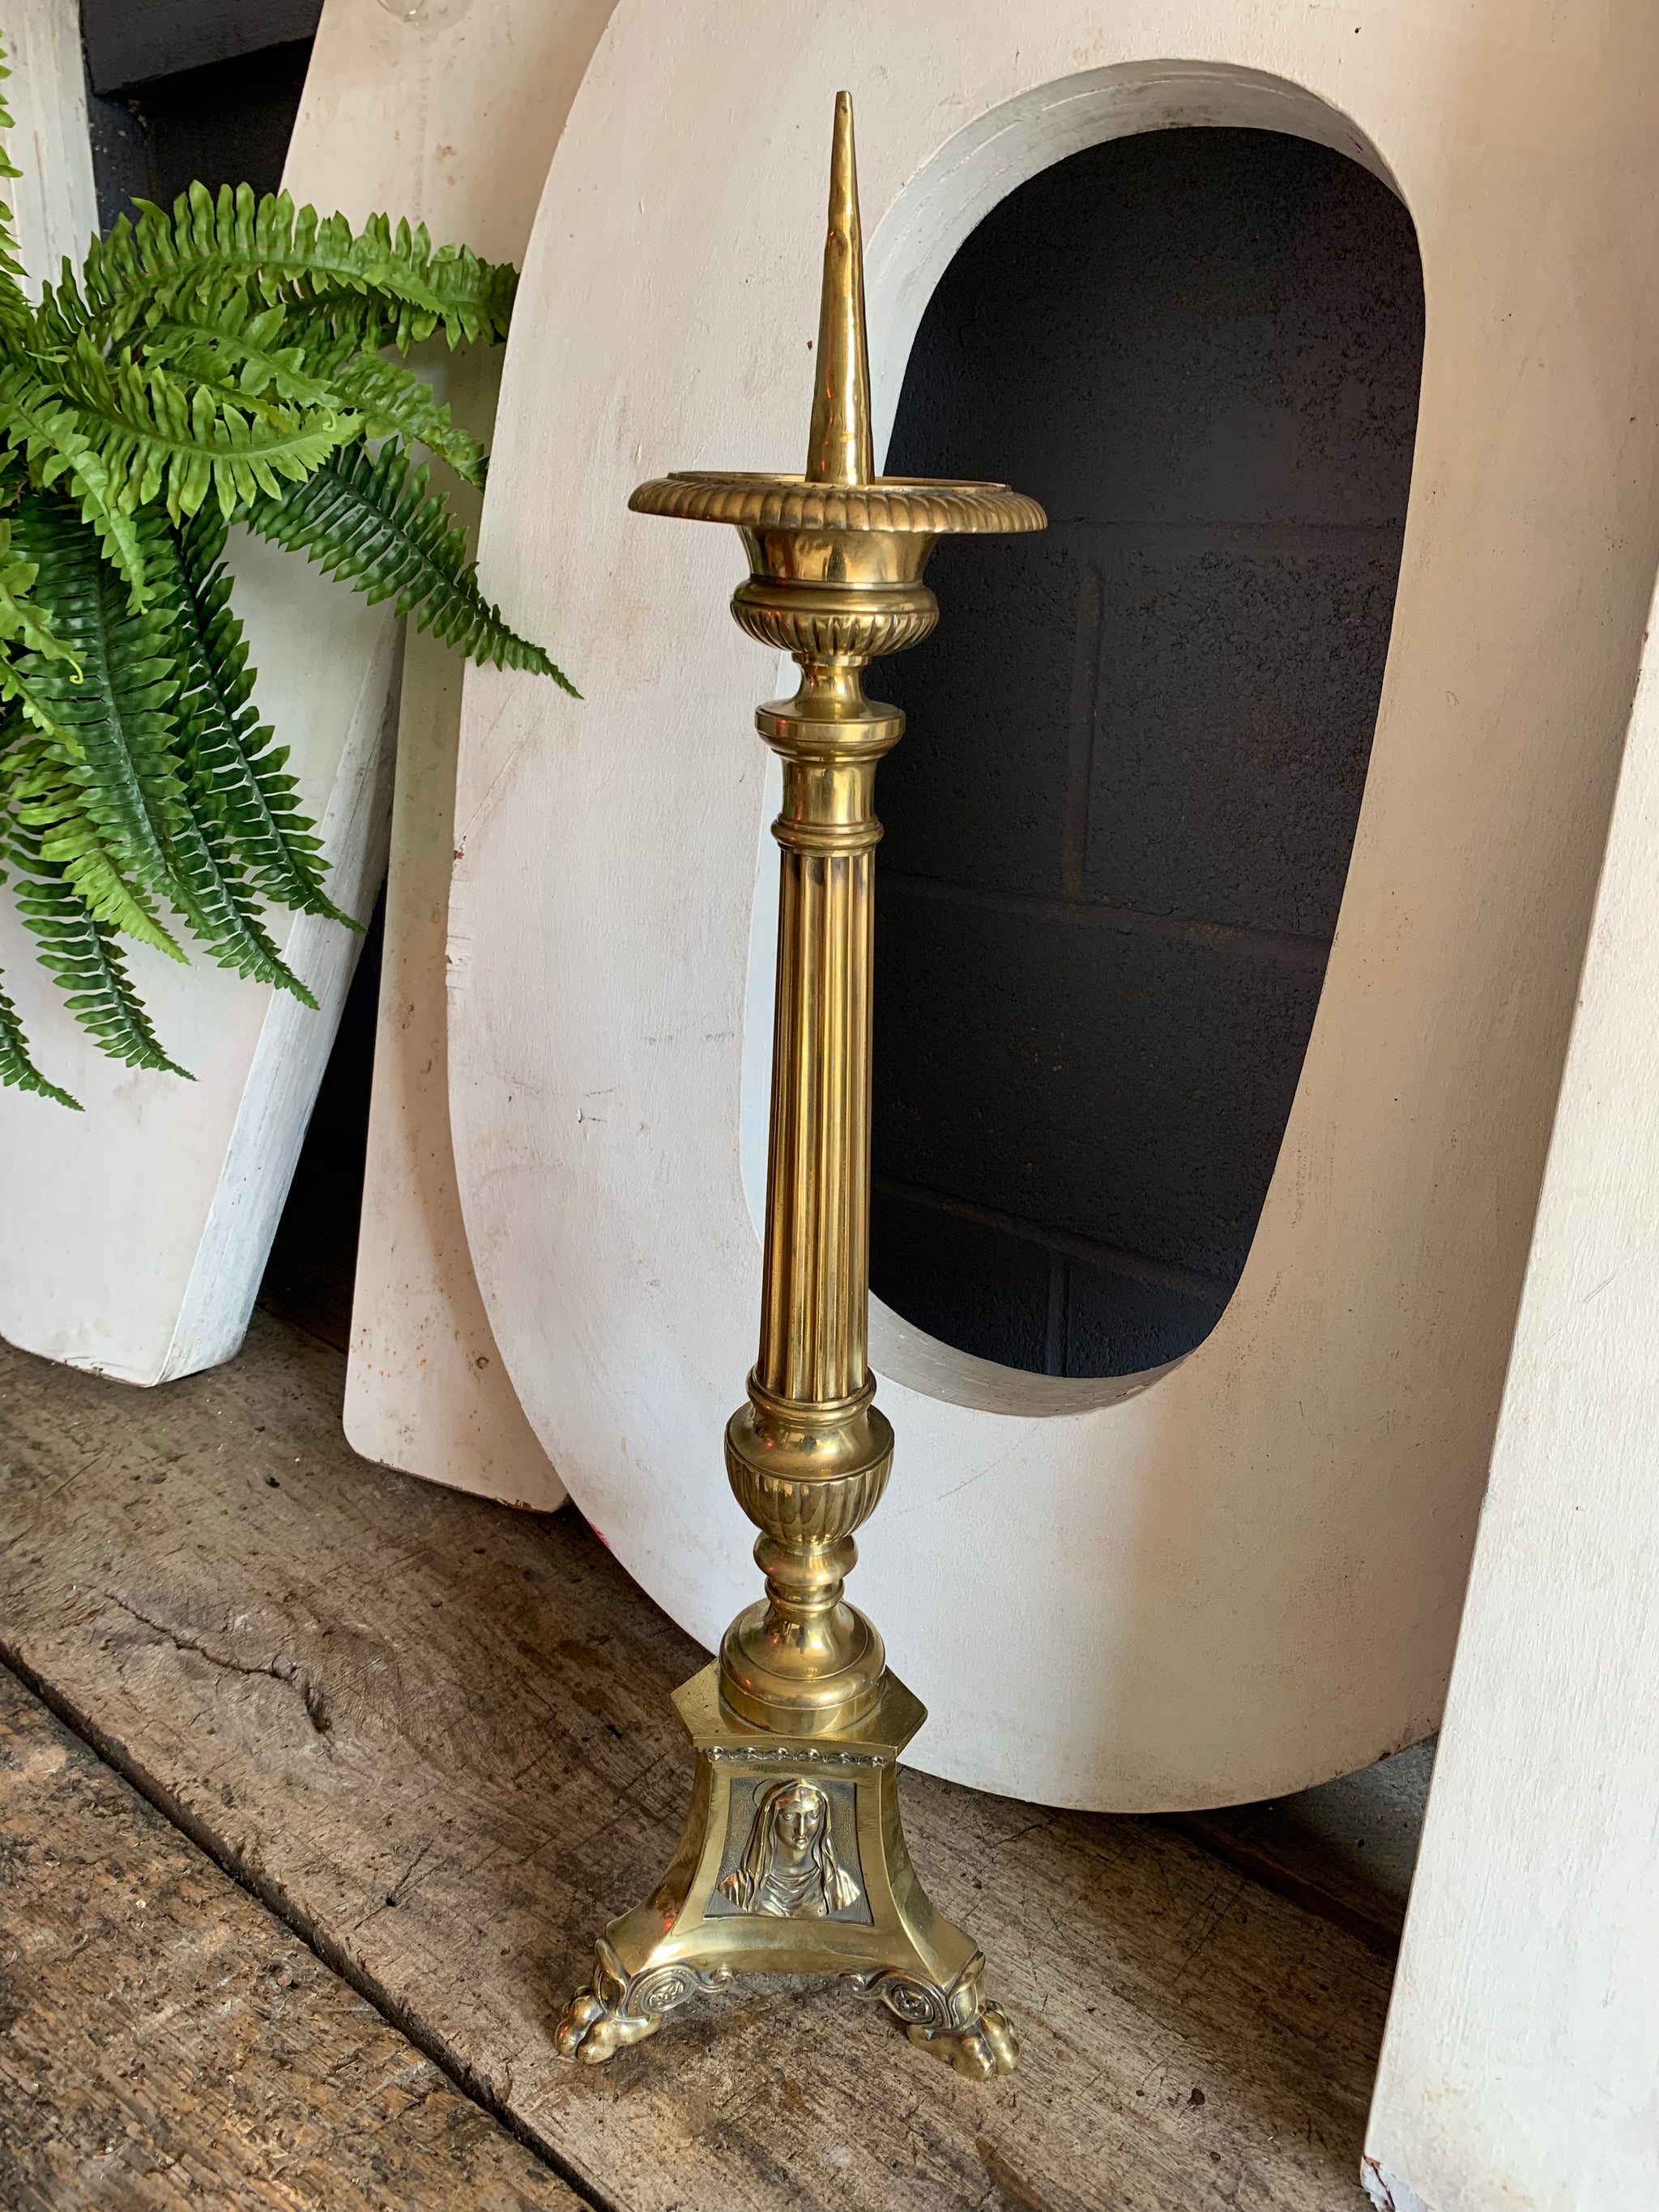 A large ornate brass Gothic church pricket candlestick - Belle and Beast  Emporium